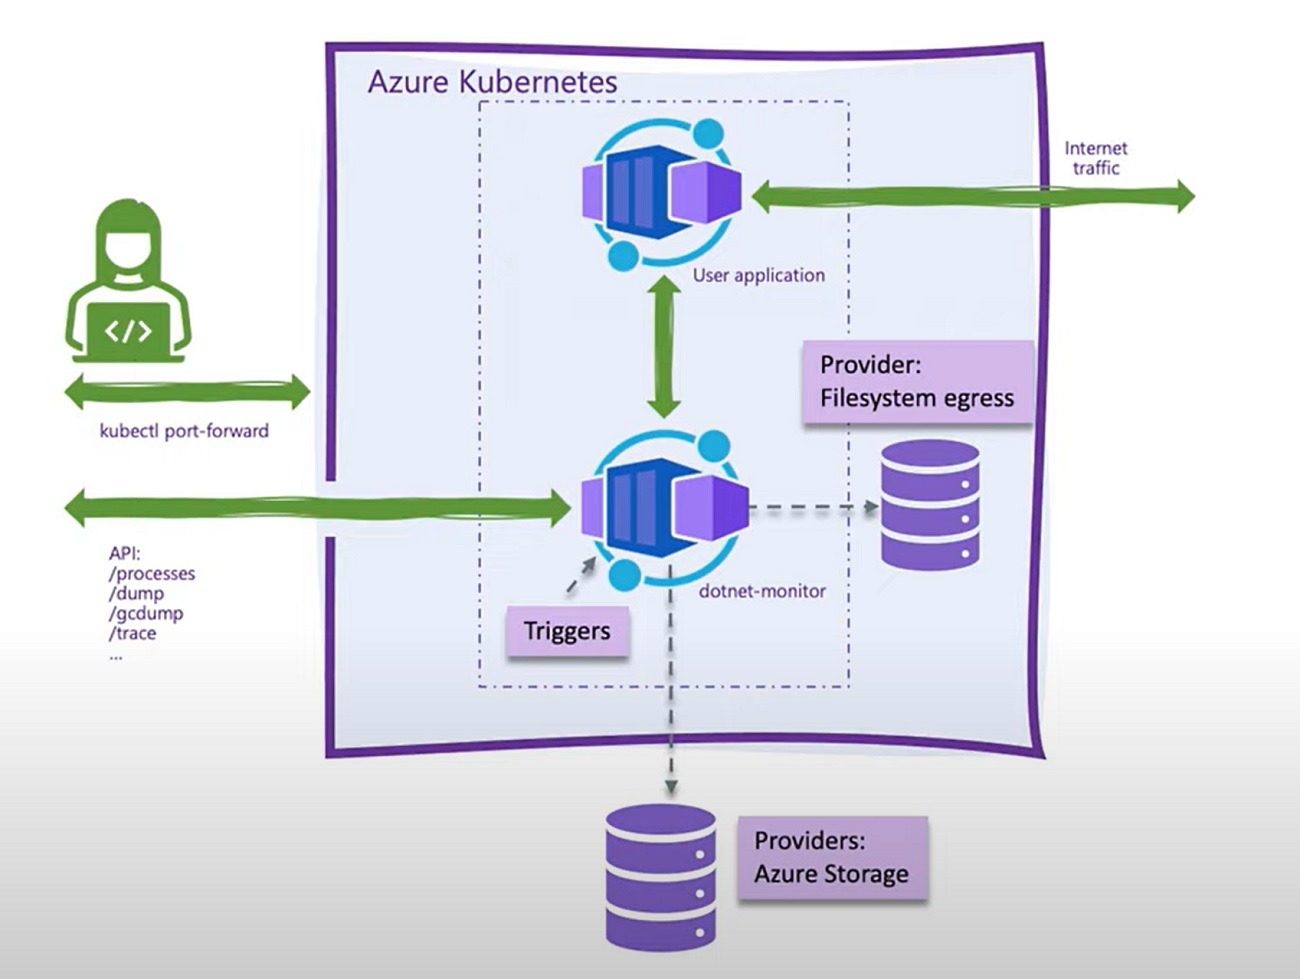 Shows a diagram with a User Application (accessible from the internet). It show dotnet-monitor connected to the User App and engineer with the ability to run commands against both the container and dotnet-monitor.